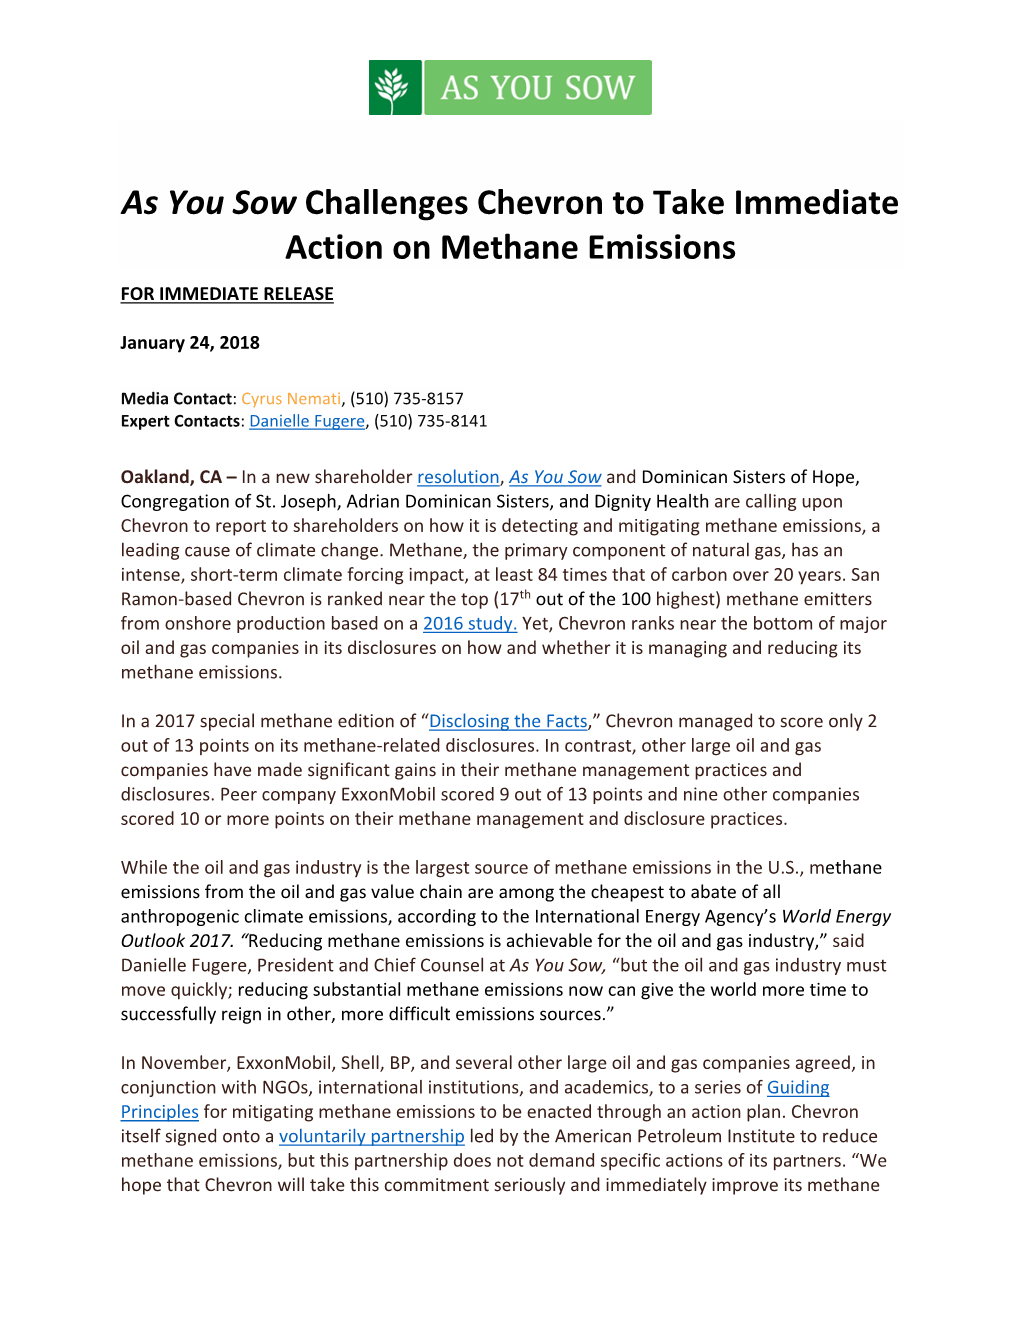 As You Sow Challenges Chevron to Take Immediate Action on Methane Emissions for IMMEDIATE RELEASE